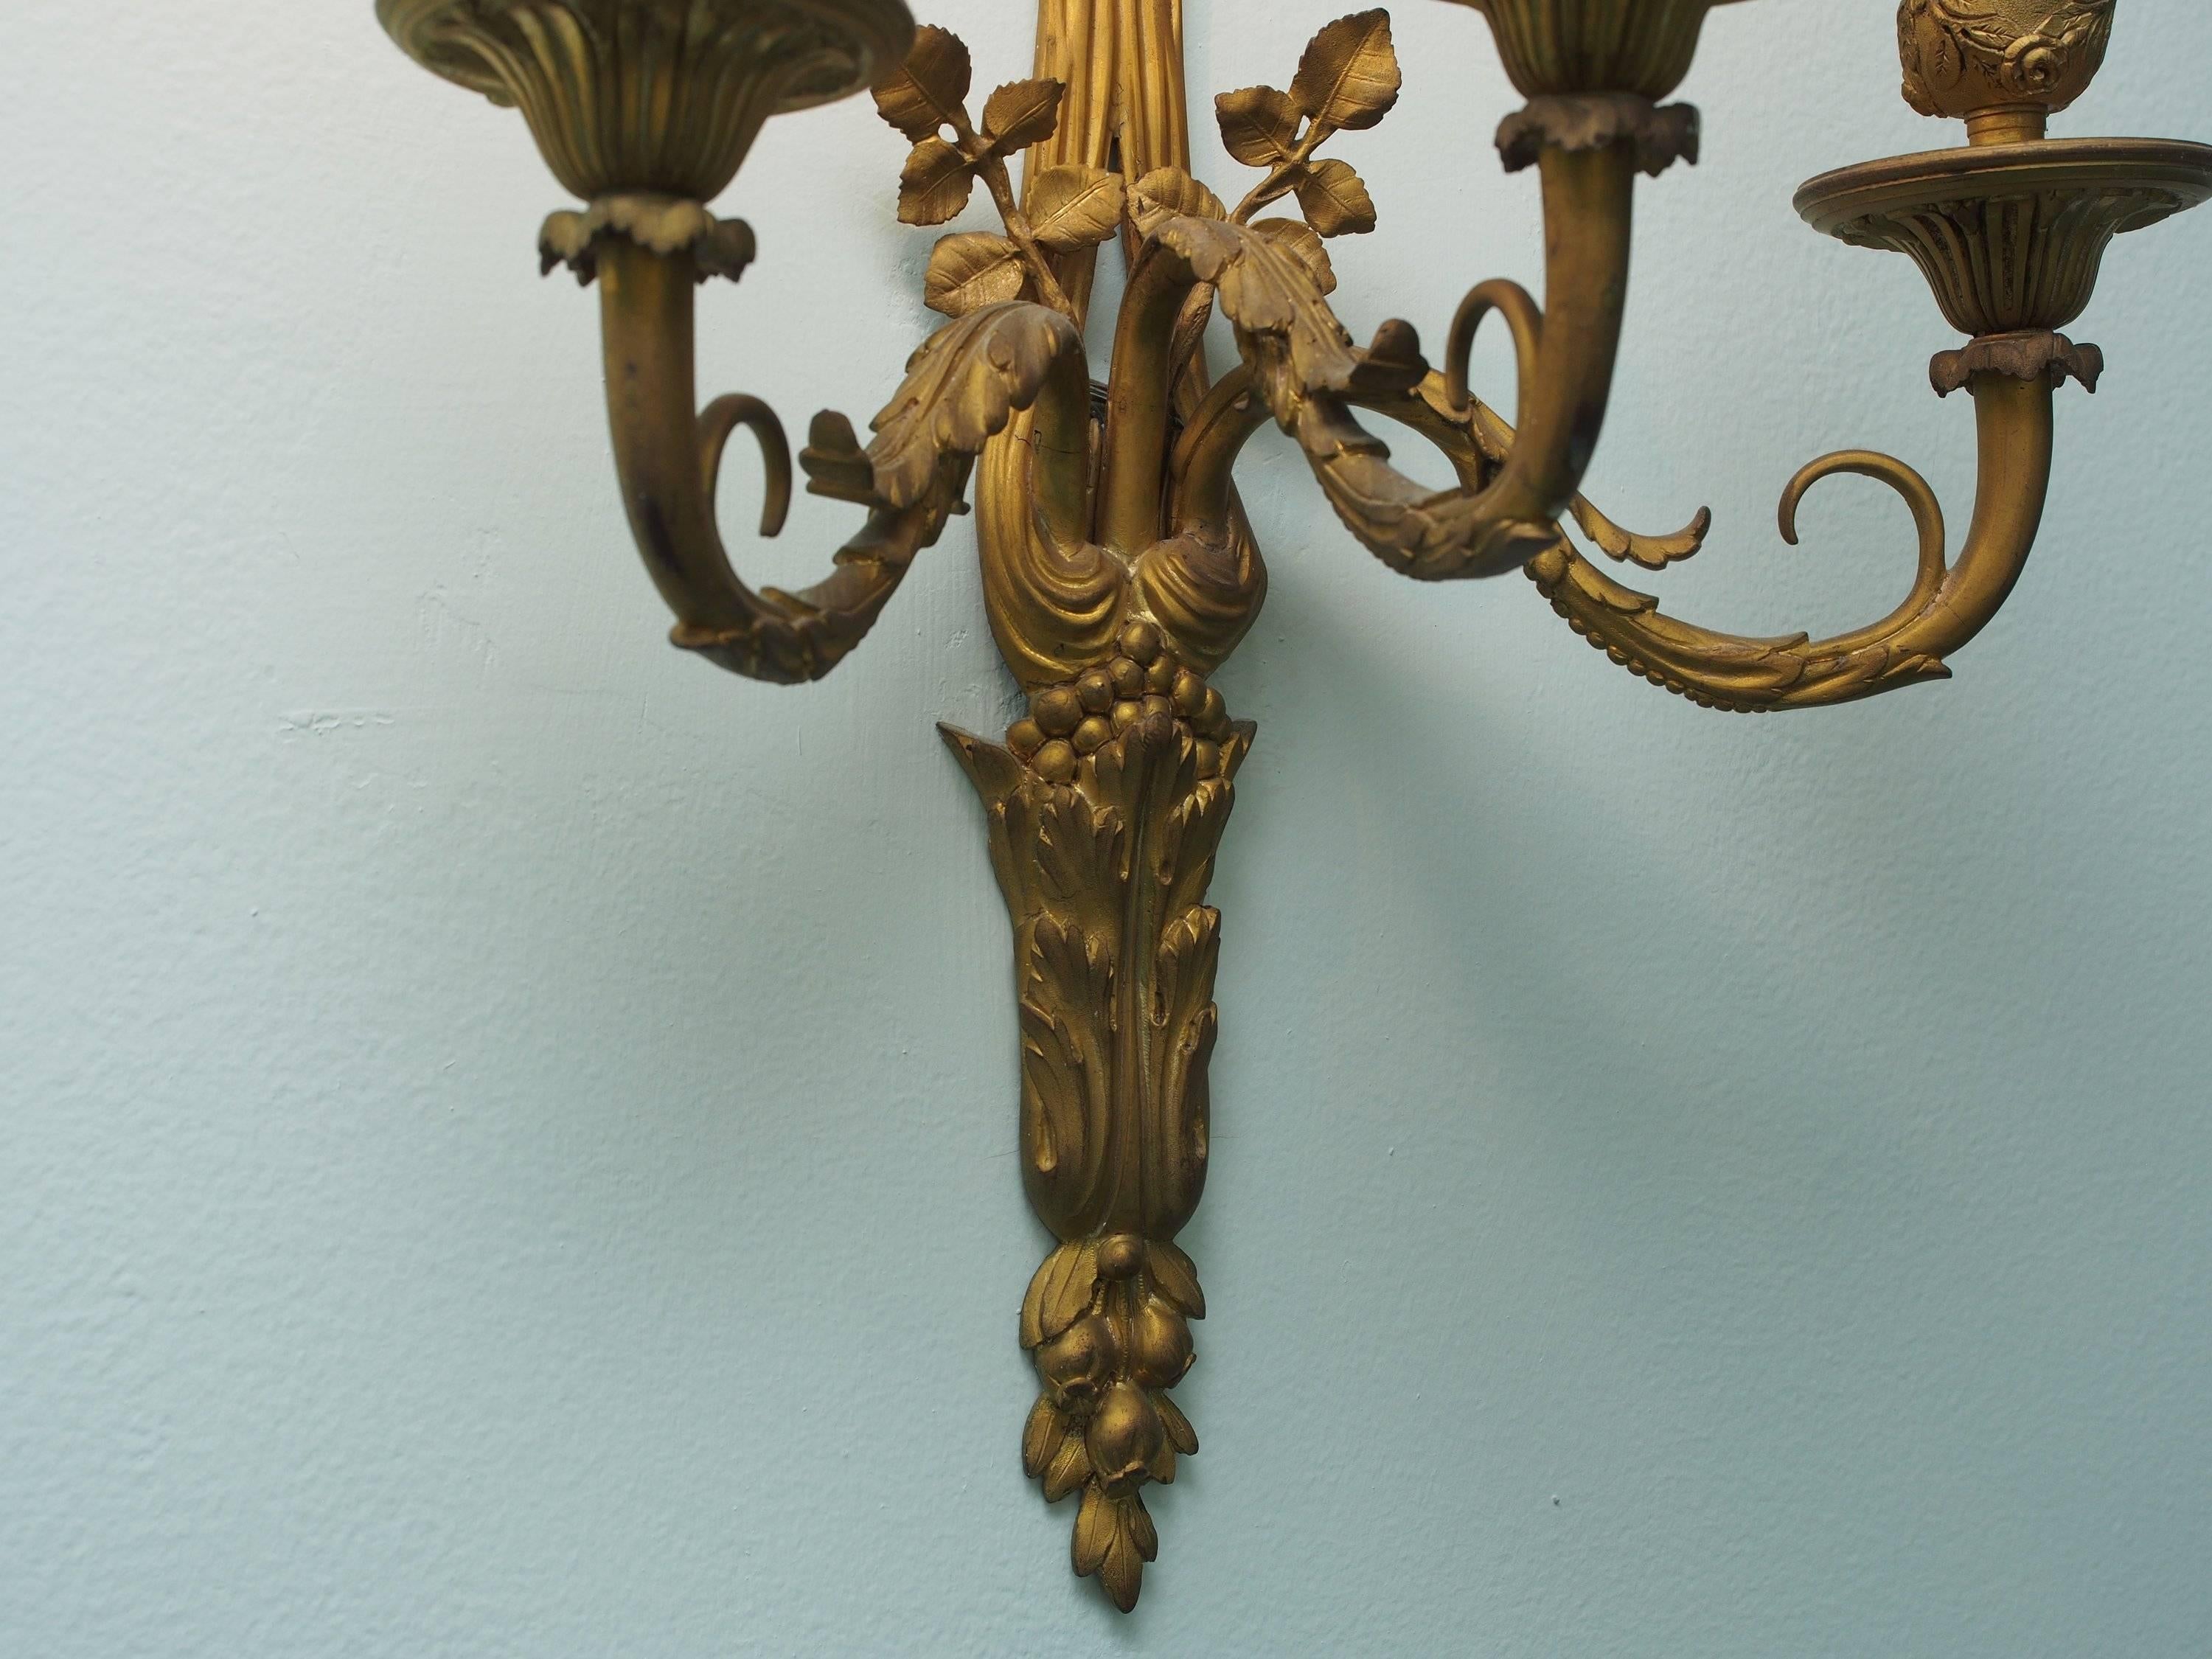 Pair of dore bronze wall sconces with tied ribbon crest, draped down and holding three arms, circa 1900-1920. The sconces with foliate lower column ending in three bell flowers, bobesche cast with roses, fluted caps and beaded trim. Each sconce